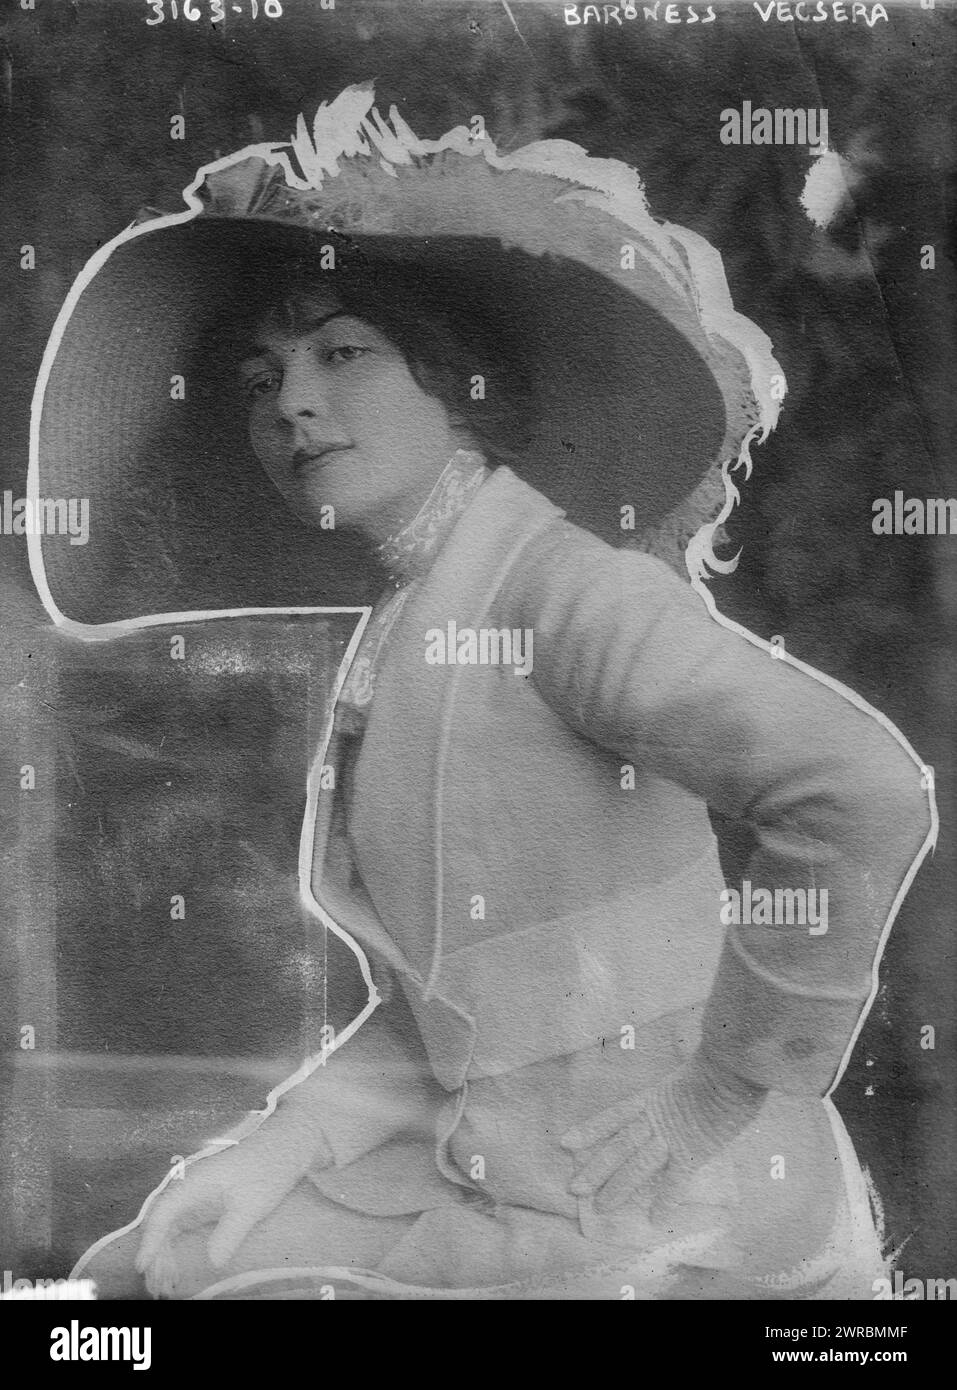 Baroness Vecsera i.e., Vetsera, Photograph shows Baroness Marie Alexandrine von Vetsera (1871-1889) the mistress of Crown Prince Rudolf of Austria, who died with him in the Mayerling Incident., between ca. 1910 and ca. 1915, Glass negatives, 1 negative: glass Stock Photo